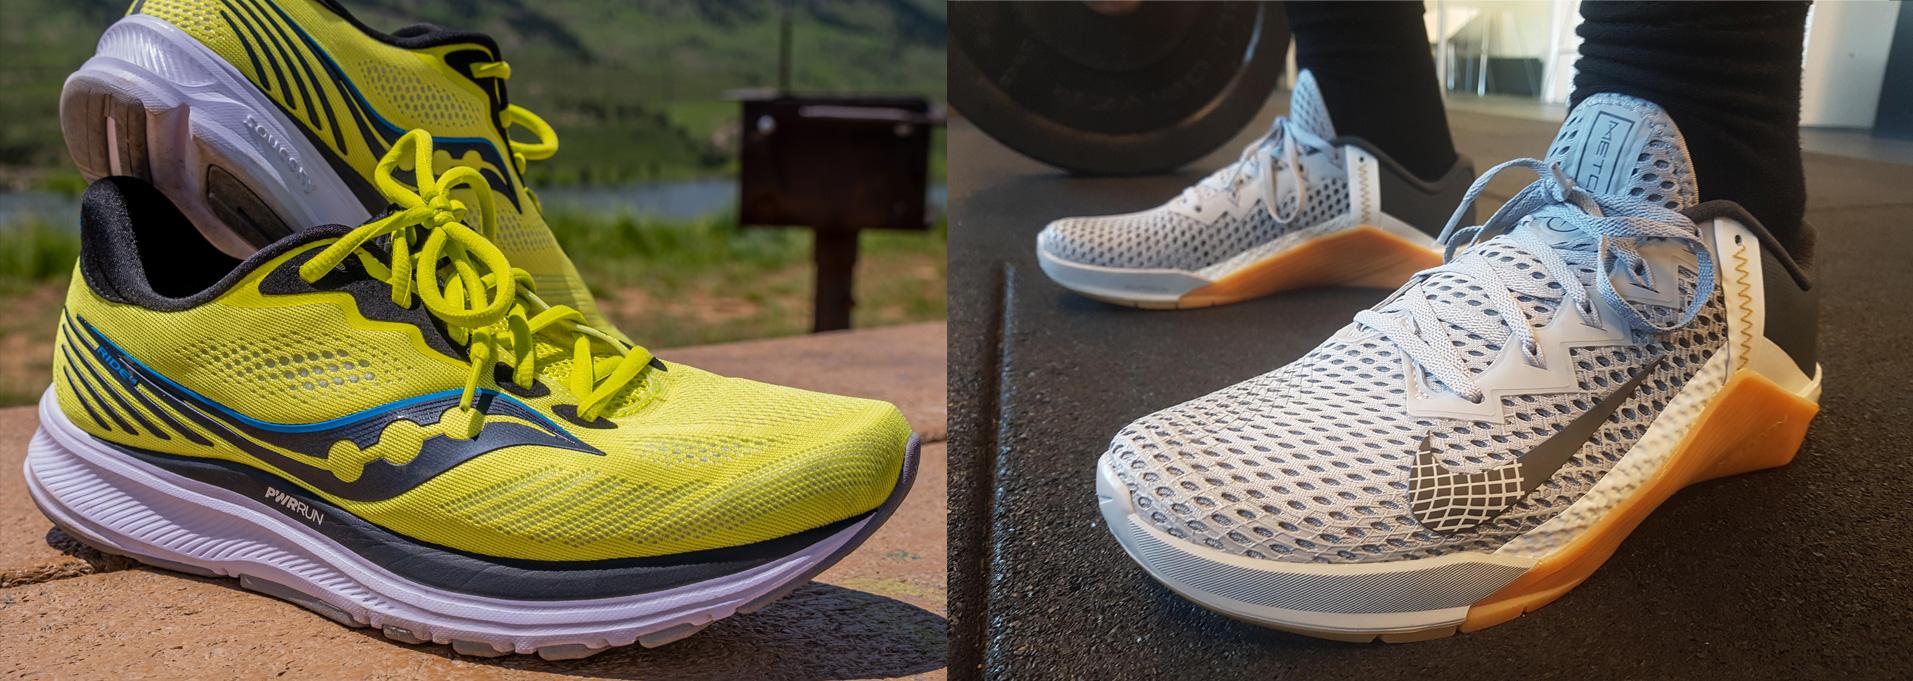 7 Best Treadmill Running Shoes, 100+ Shoes Tested in 2022 | RunRepeat